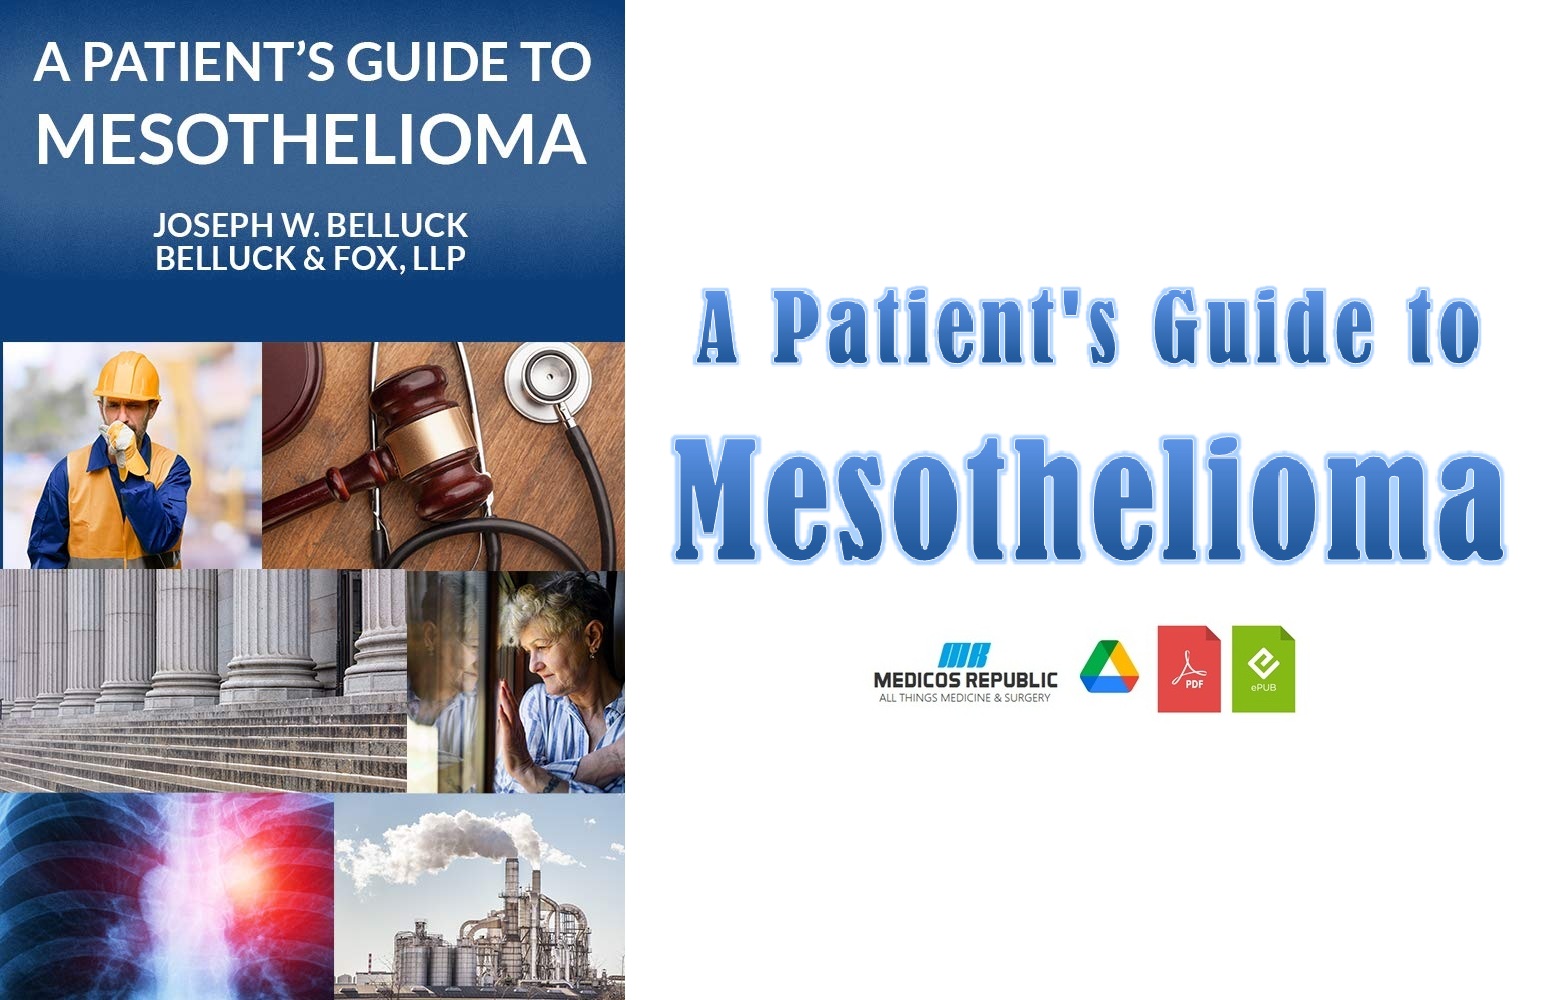 A Patient's Guide to Mesothelioma PDF